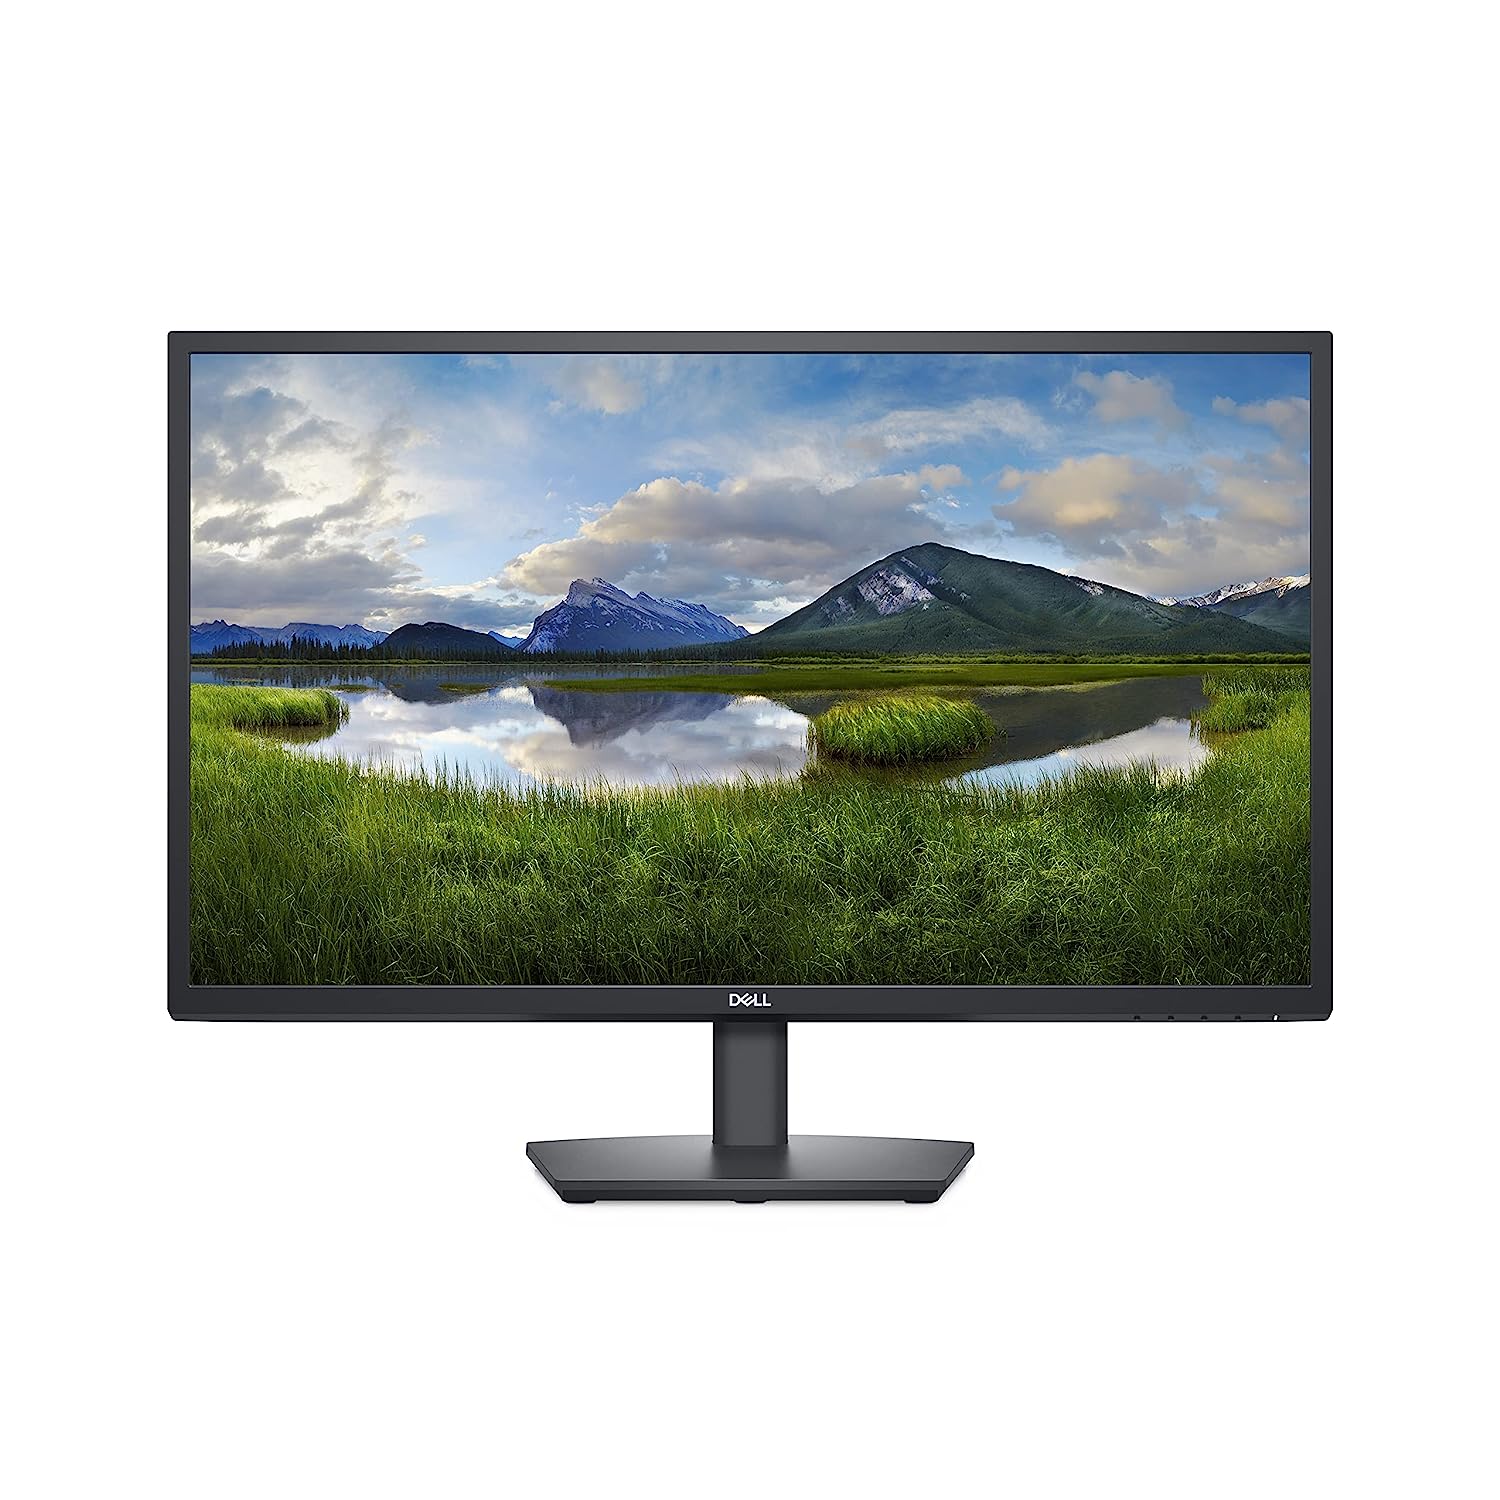 Dell 27" (68.58 cm) FHD Built-in Dual Speakers Monitor 1920 x 1080 Pixels at 60 Hz|IPS Panel|Brightness: 300 cd/m²|Colour Support: 16.7m|Response Time 8ms(G-to-G Normal),5ms(G-to-G Fast) E2722HS-Black-Monitor-DELL-computerspace